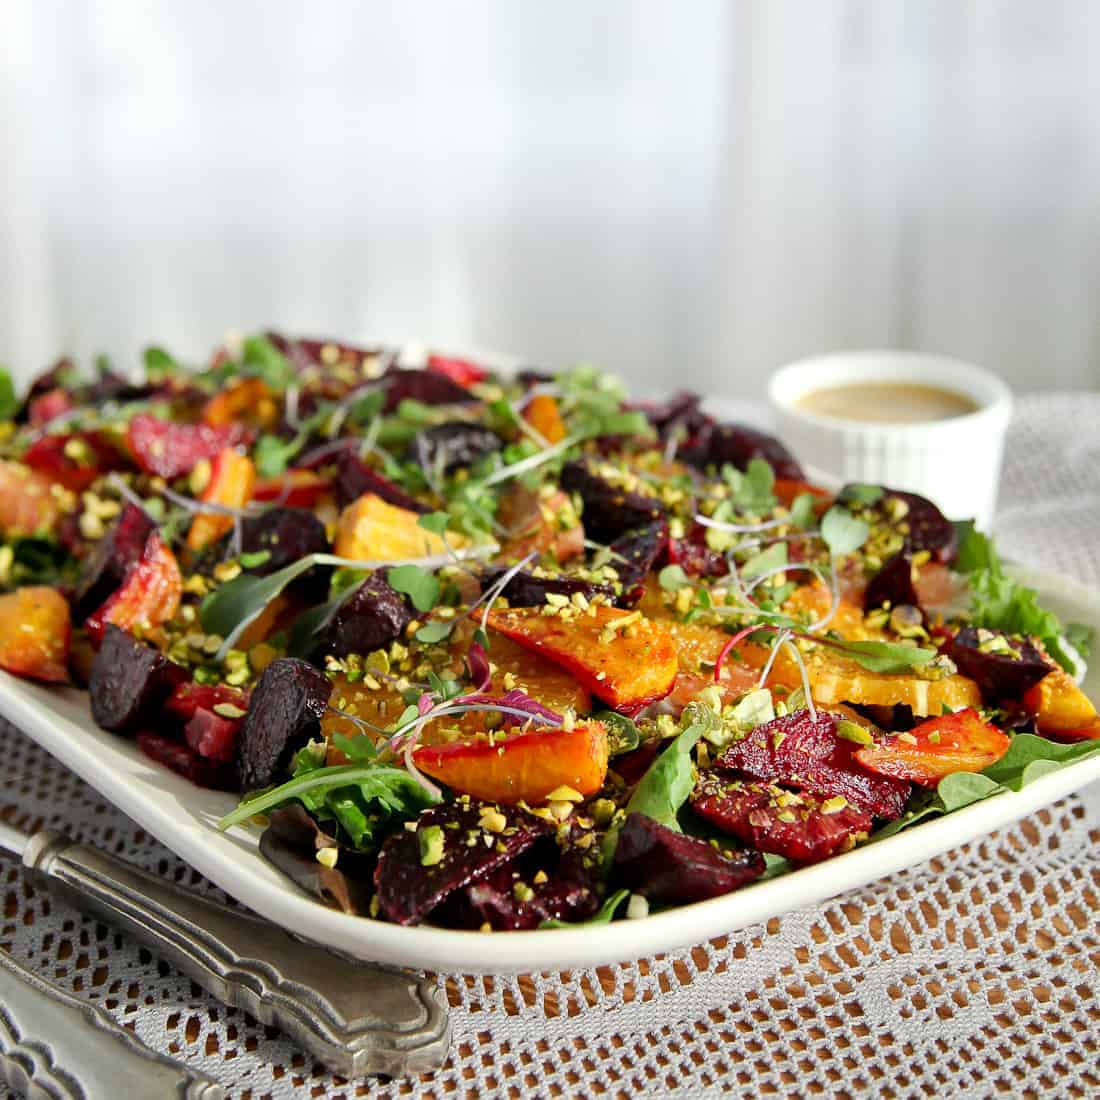 Roasted beet and citrus salad with mustard vinaigrette from https://www.snixykitchen.com/